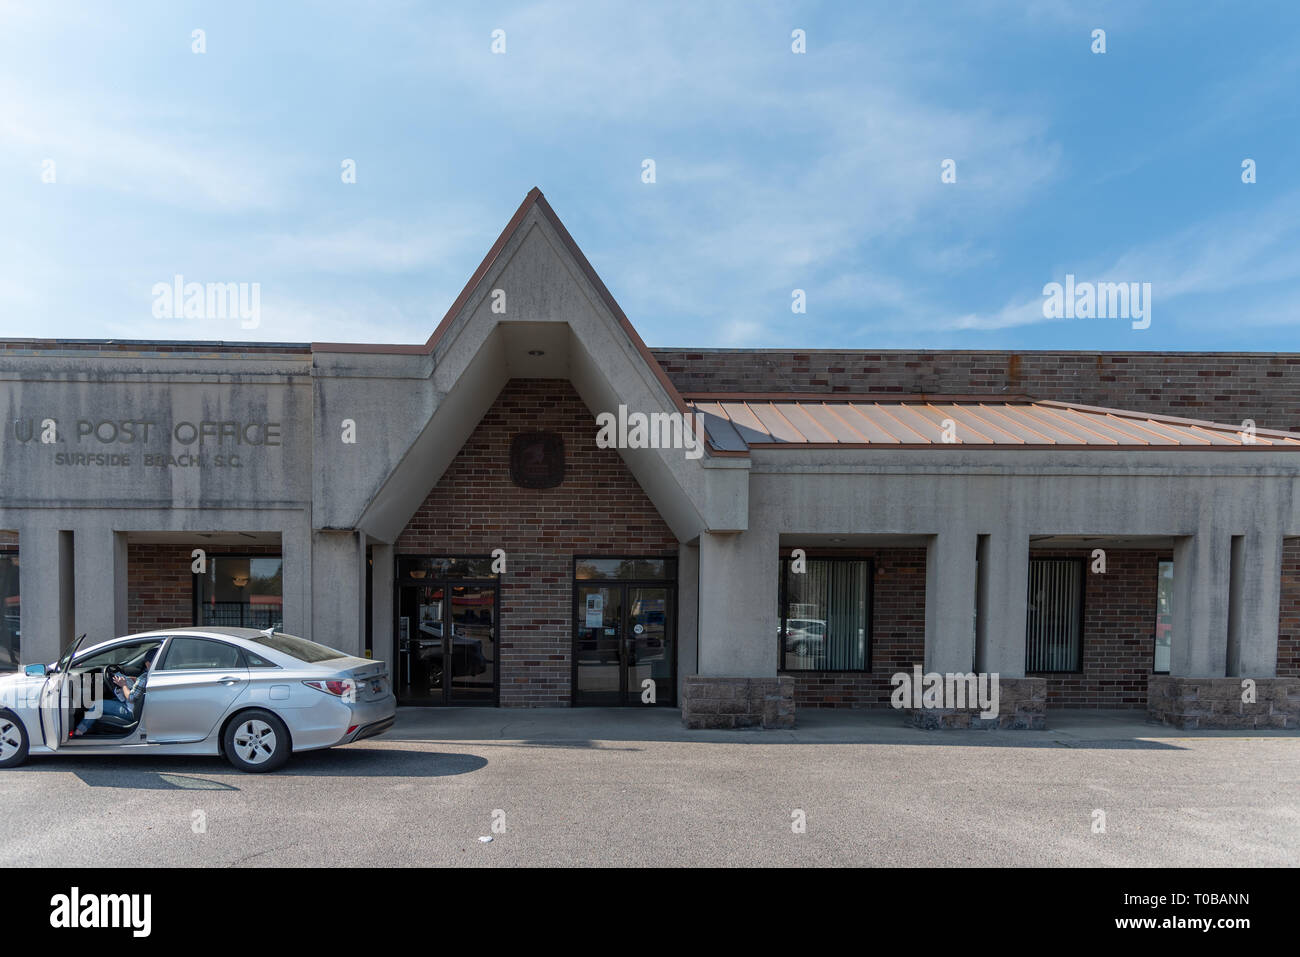 The front of the post office located in Surfside Beach, South Carolina ...